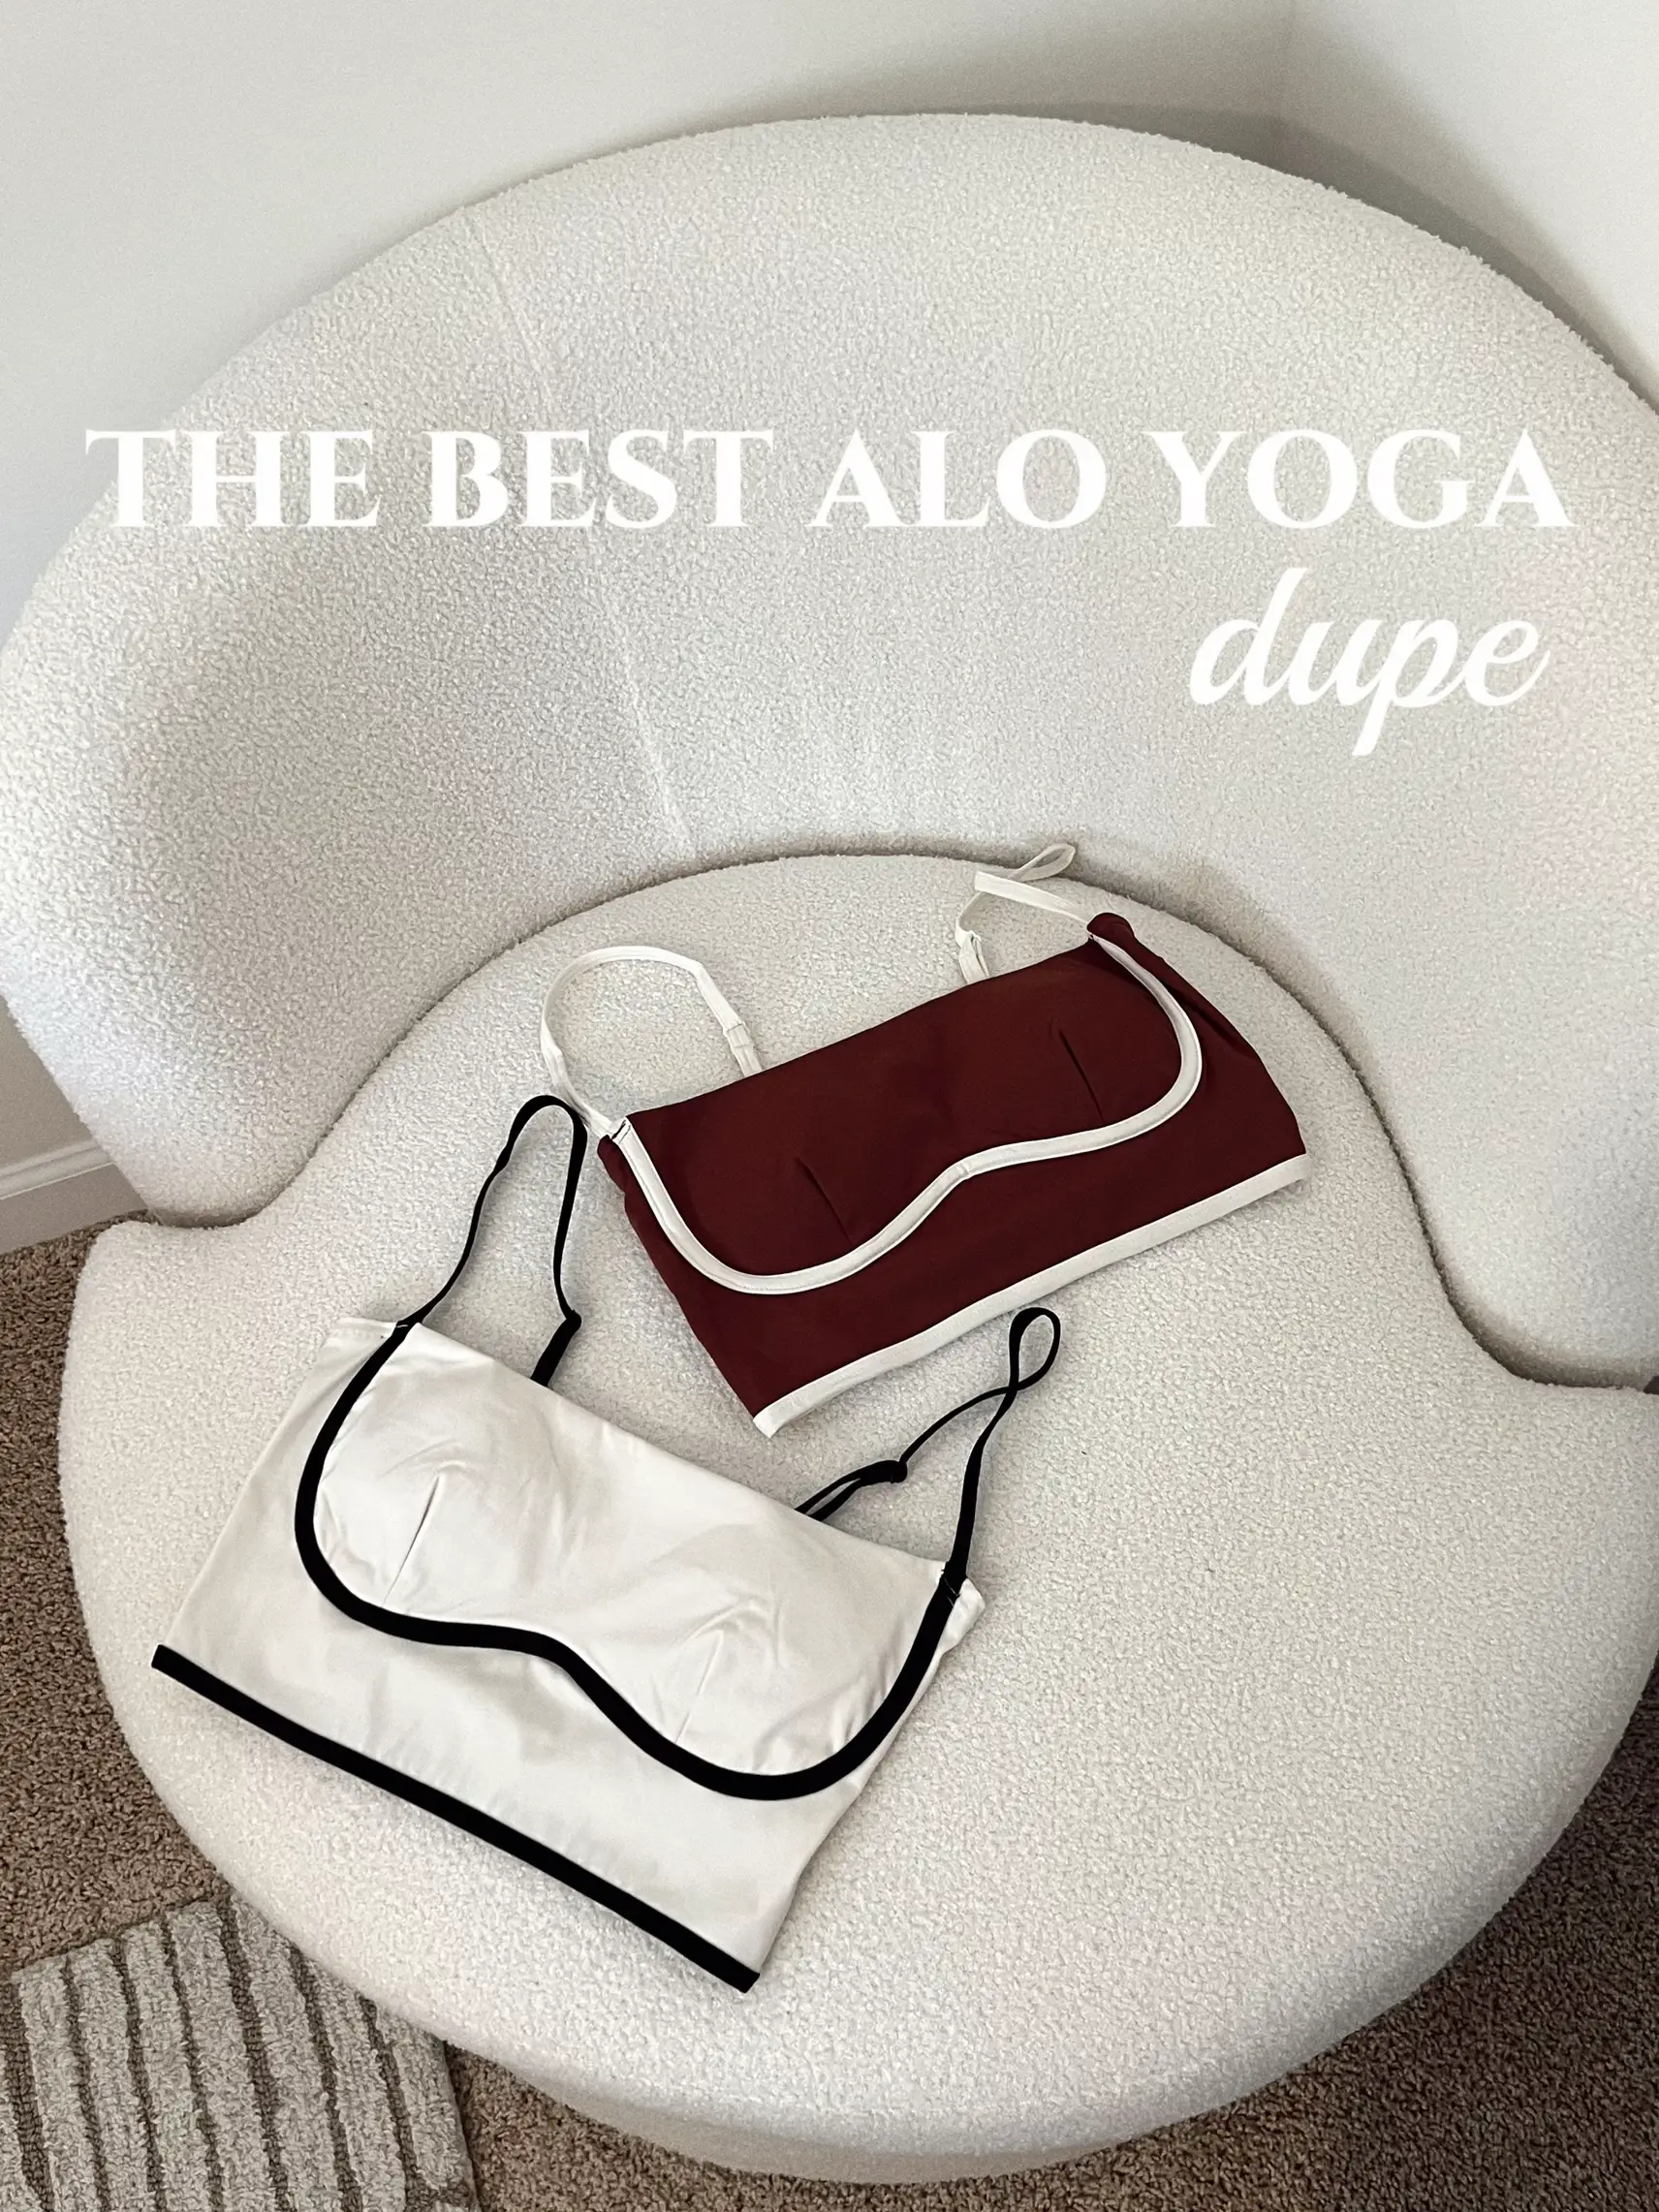 Favorite target top for walks and pilates- dupe for alo yoga! Linked i